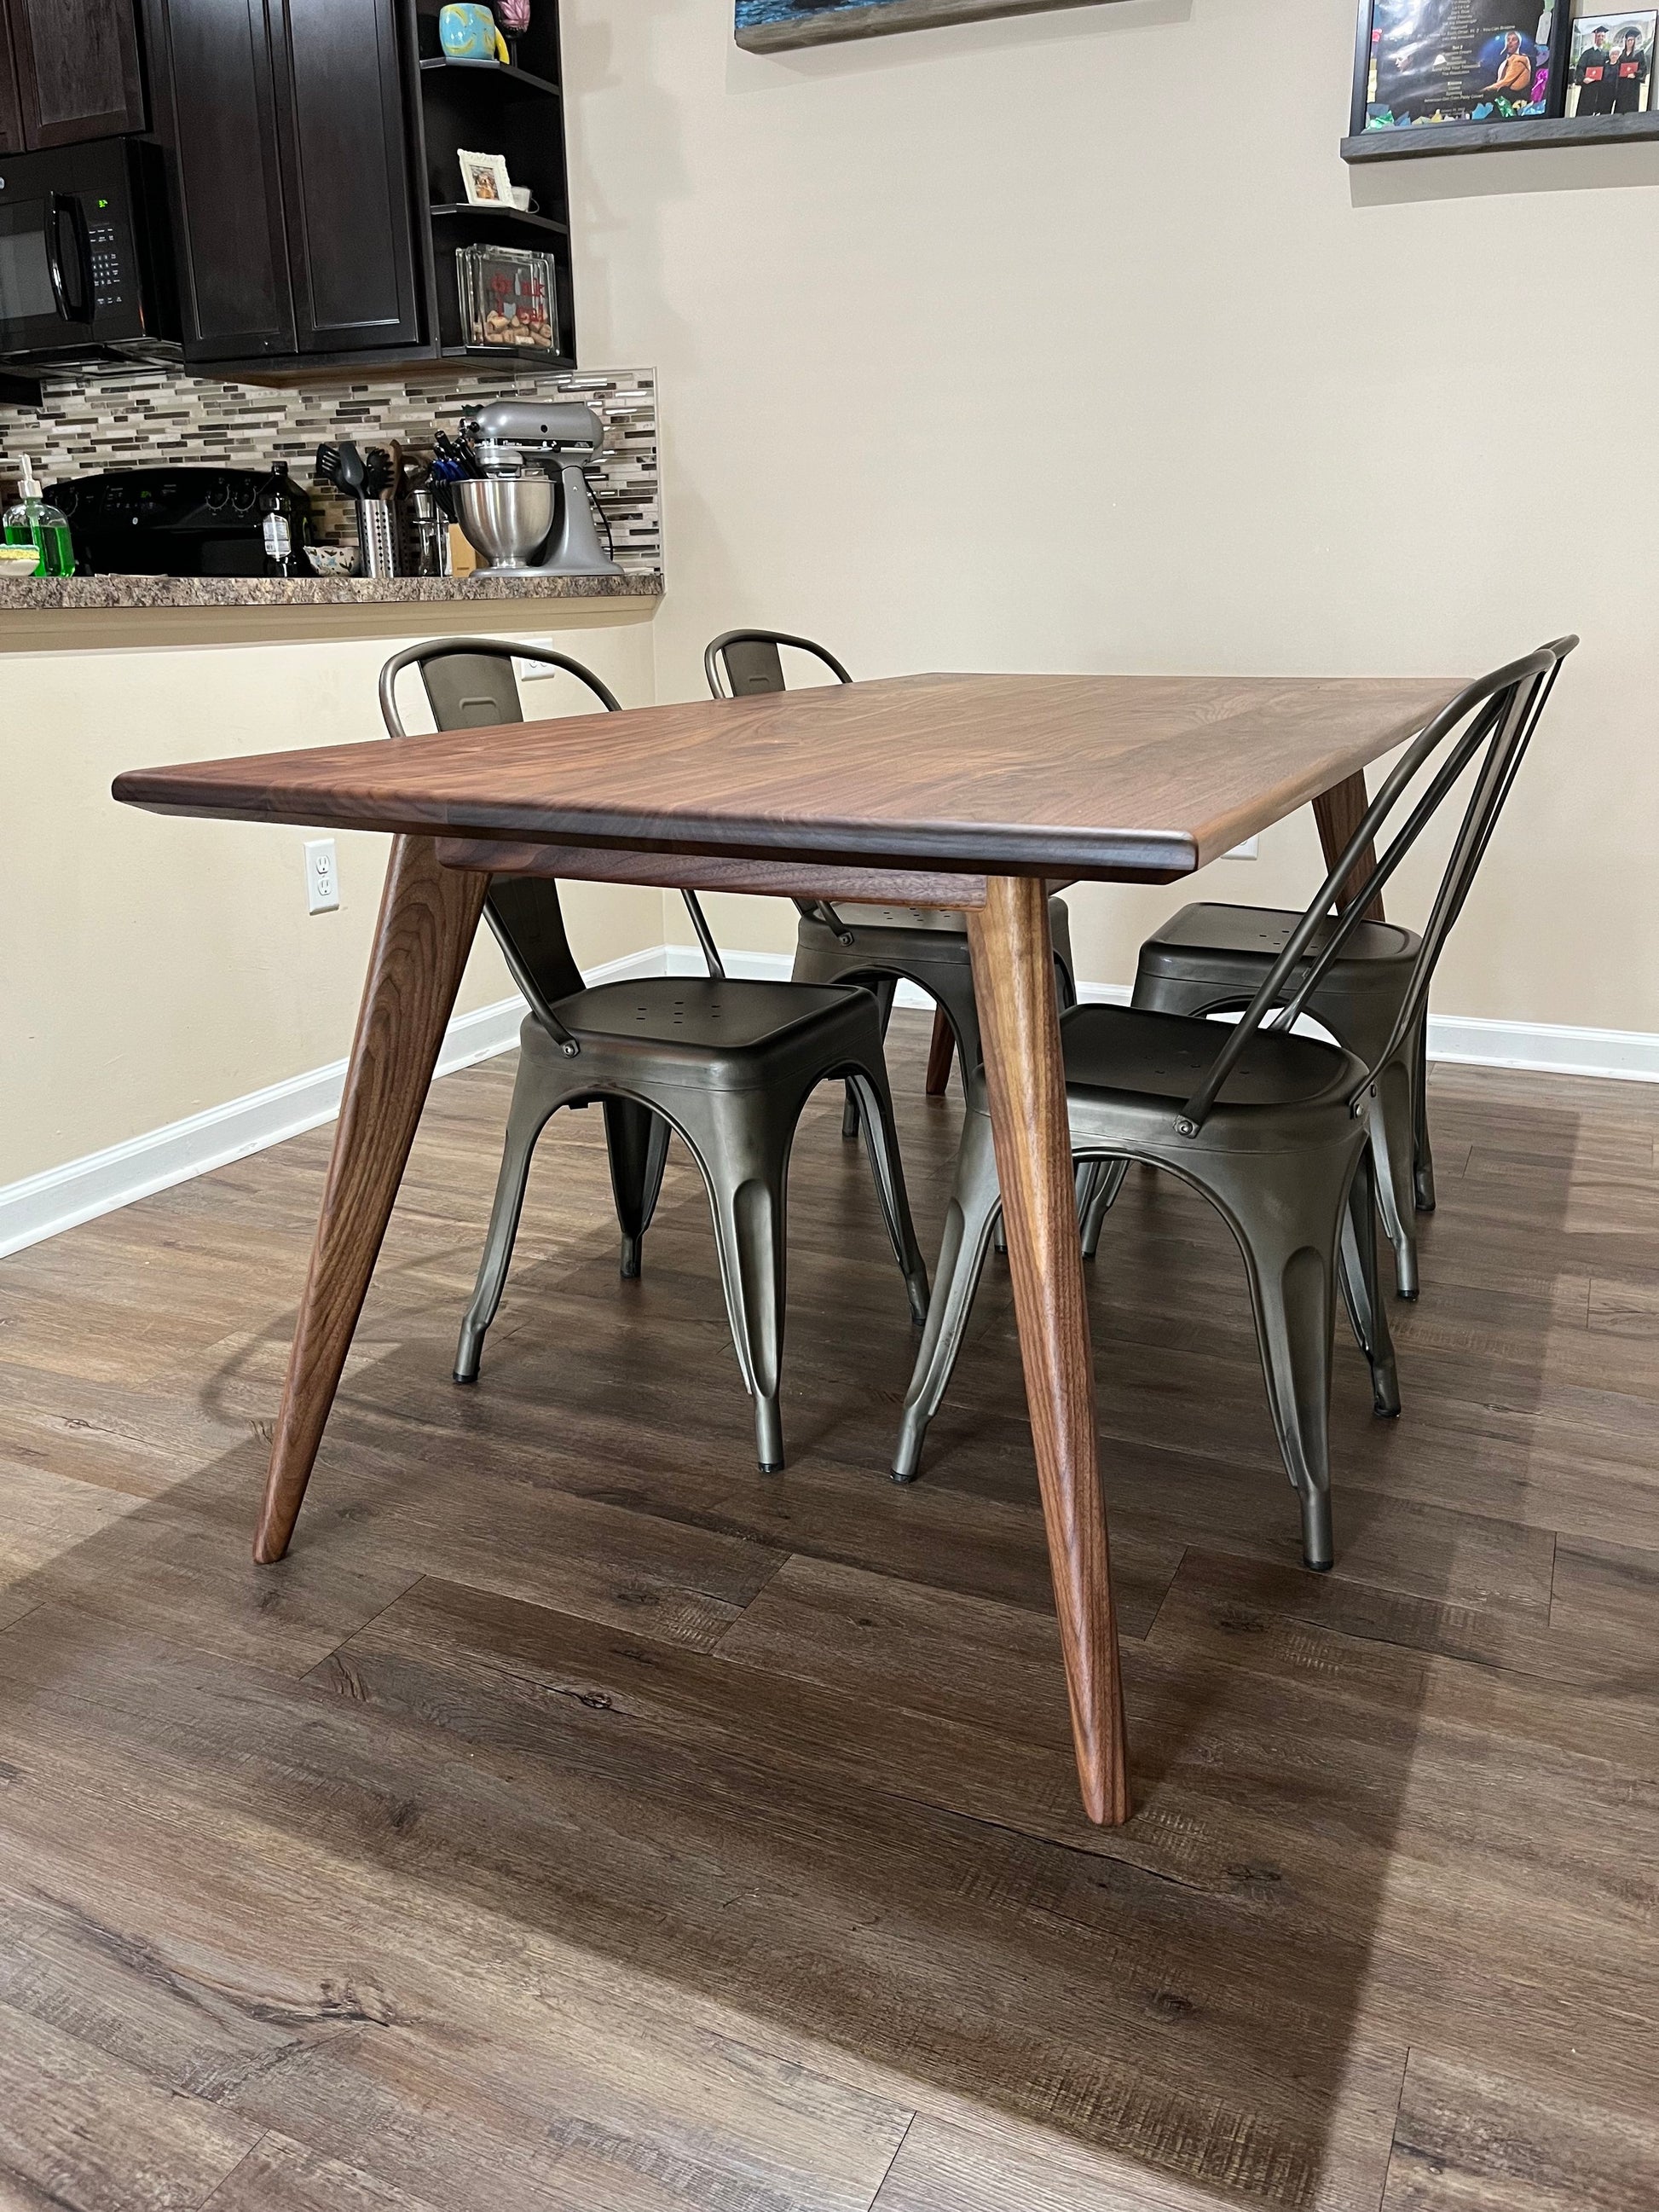 Spencley Design Co - ELEANOR DINING TABLE - PLANS